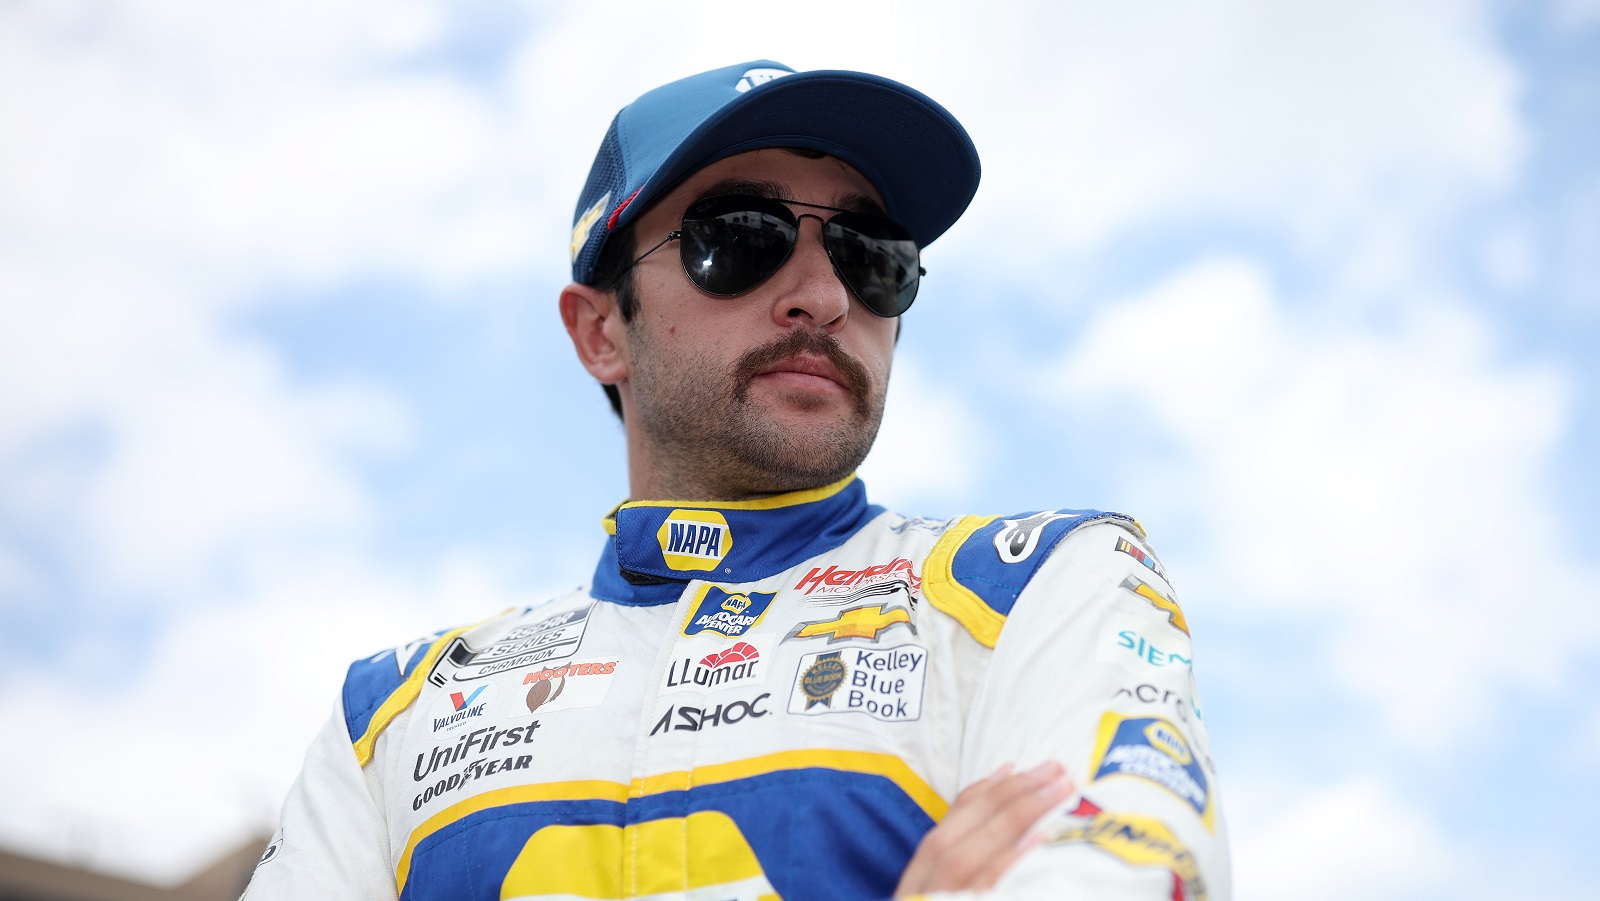 Chase Elliott waits on the grid prior to the NASCAR Cup Series Quaker State 400 at Atlanta Motor Speedway on July 10, 2022.